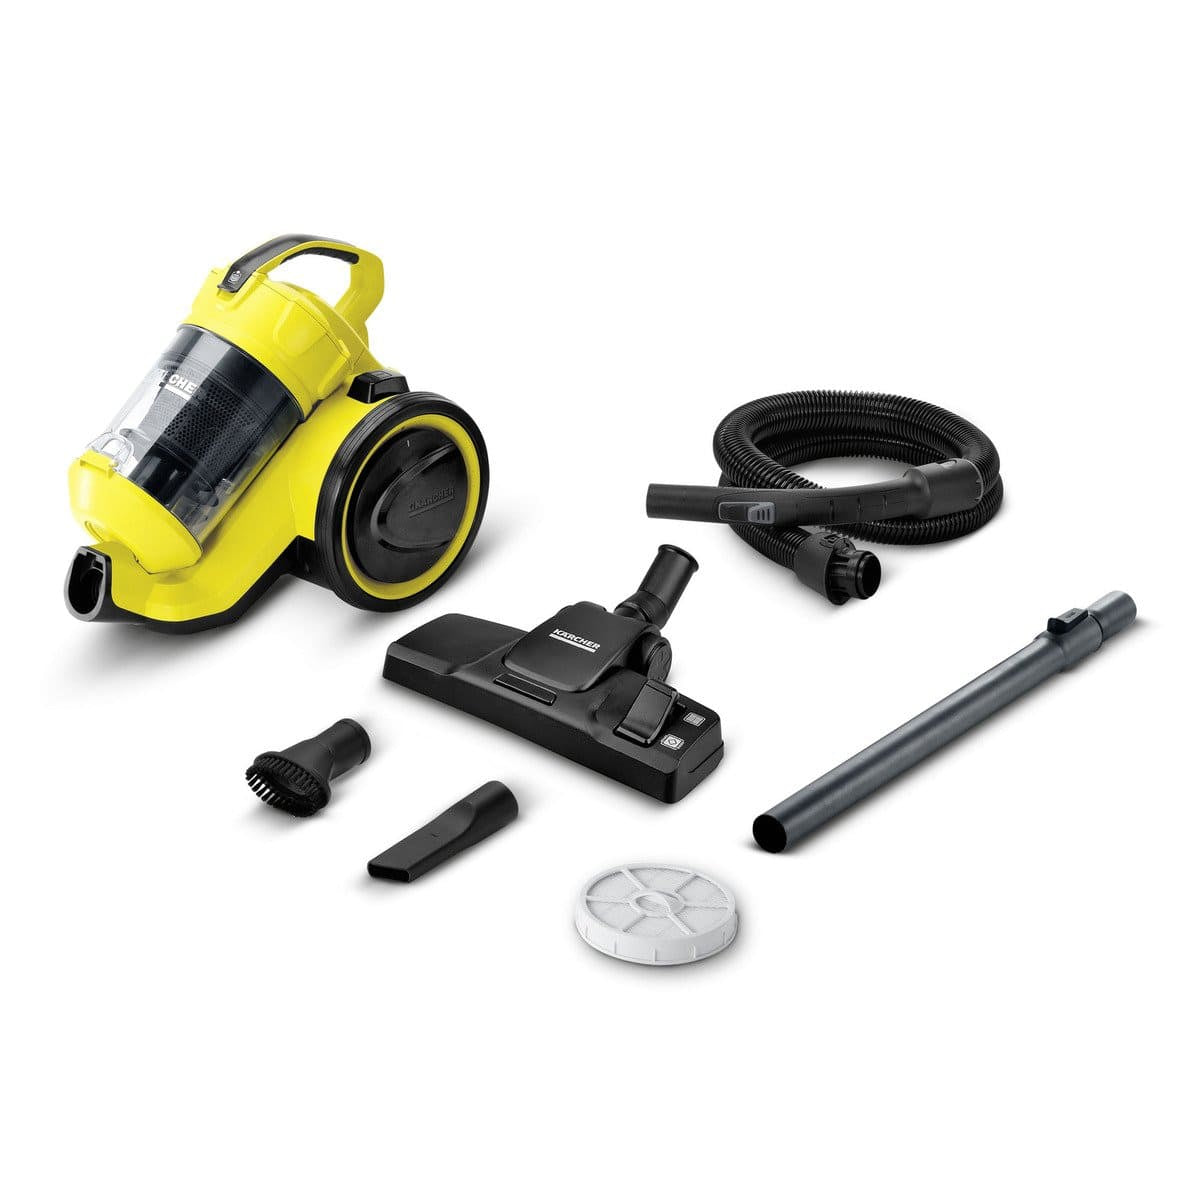 Karcher 25L Wet & Dry Vacuum Cleaner - WD 5 | Supply Master | Accra, Ghana Tools Building Steel Engineering Hardware tool